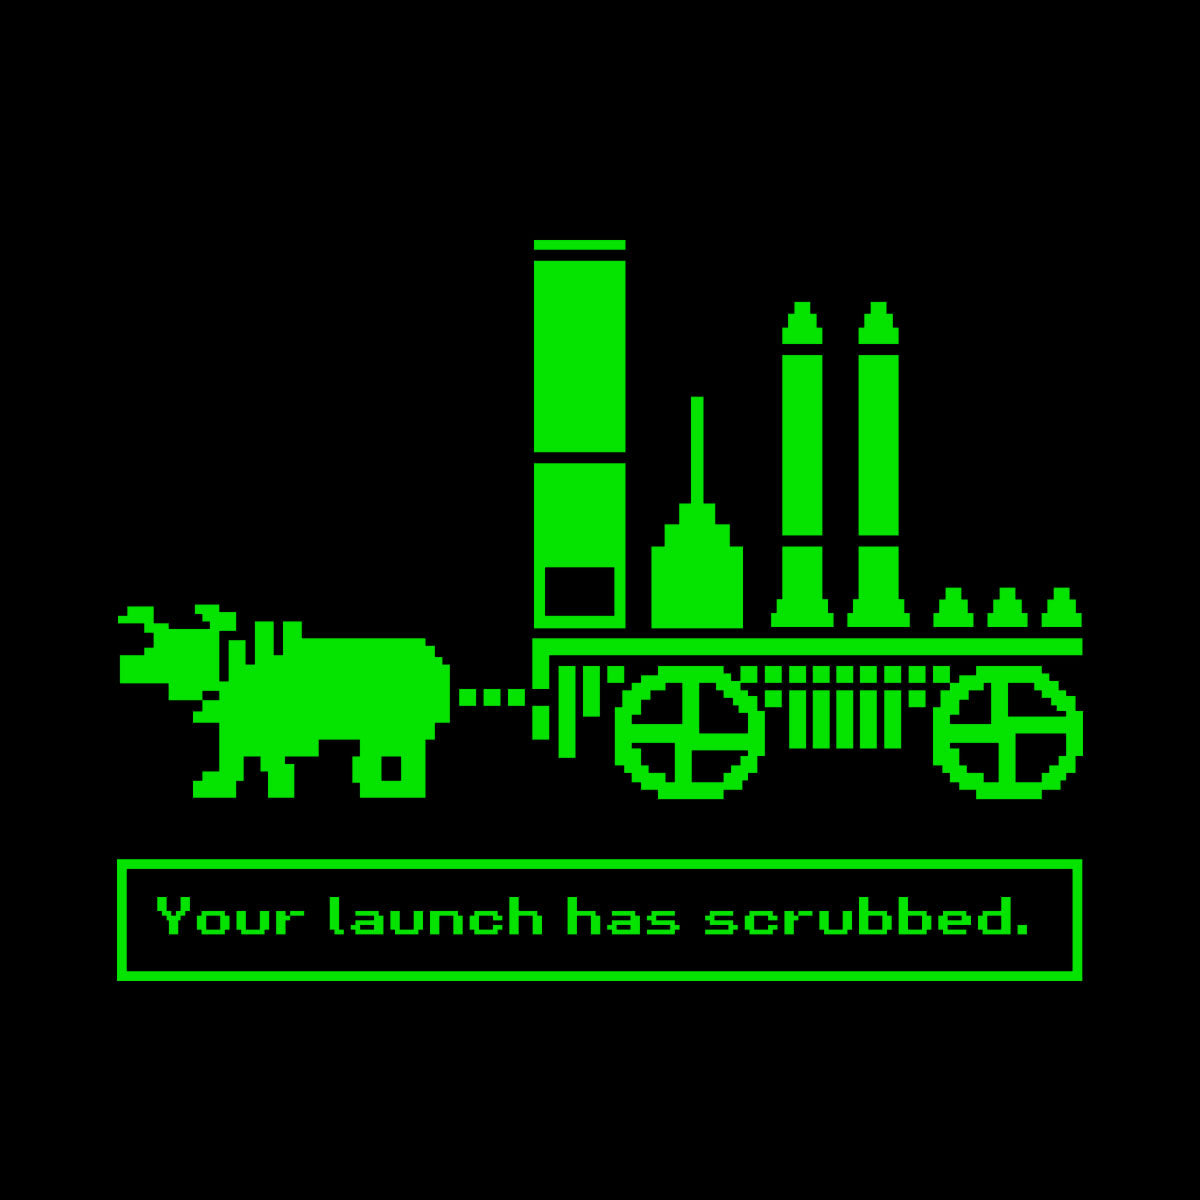 Thumbnail of oldstyle wagon carrying a rocket with the text "your launch has been scrubbed" on a black background